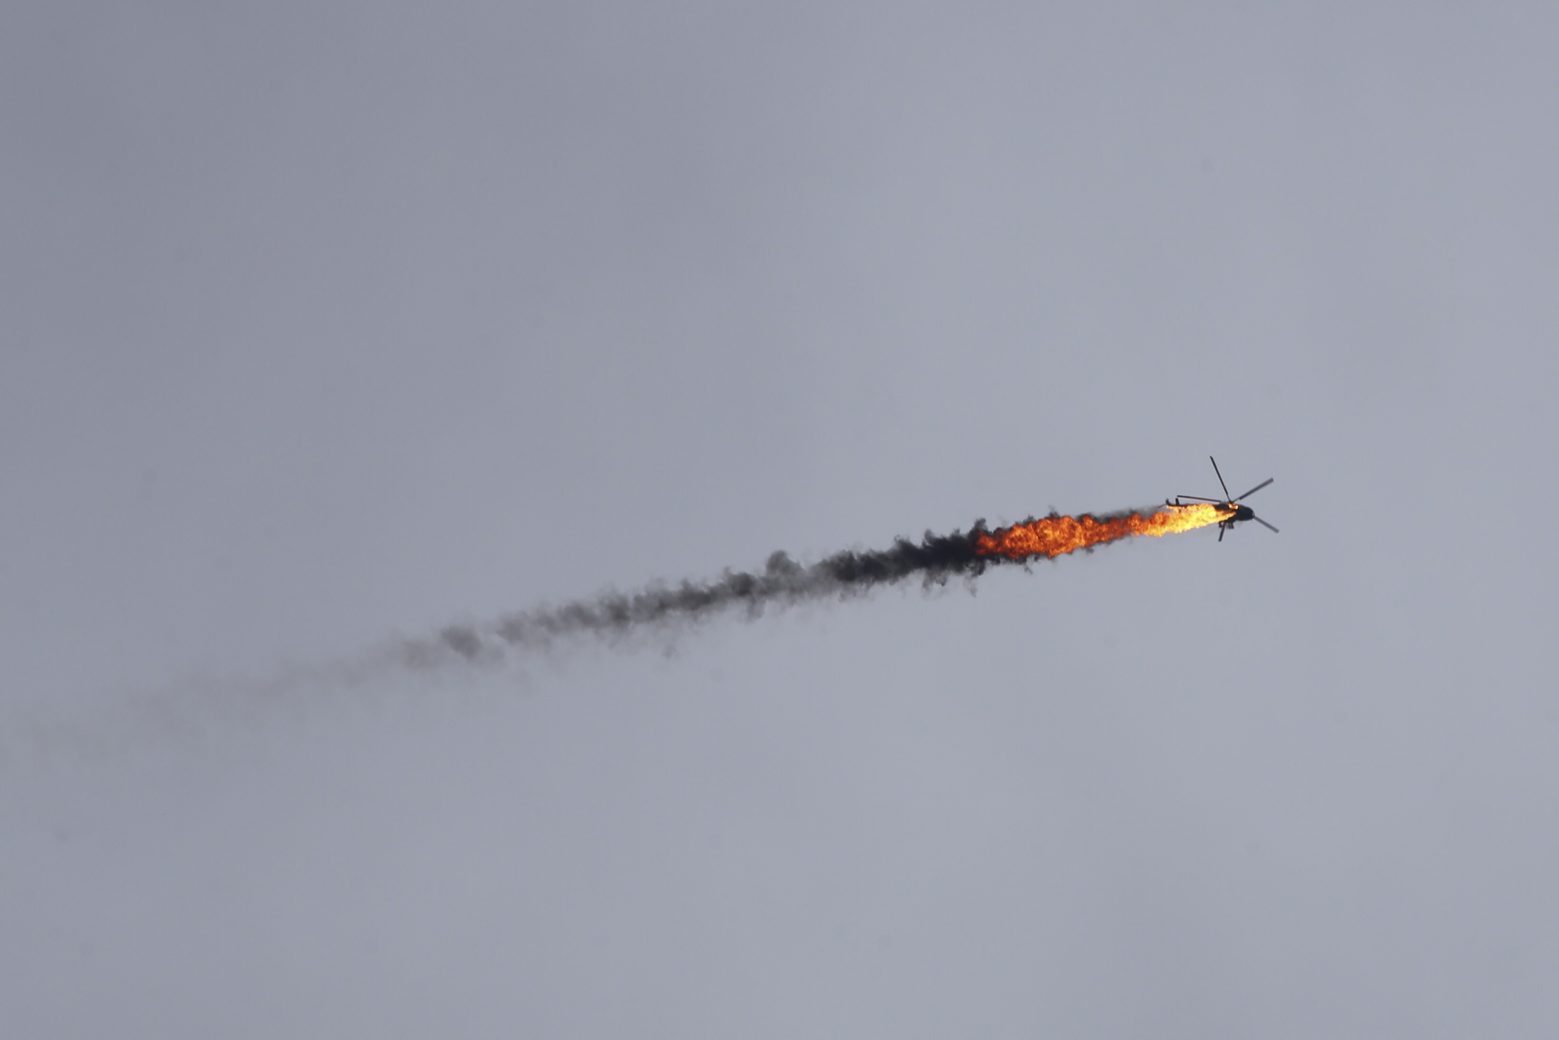 Syrian government helicopter is shot by a missile in Idlib province, Syria, Tuesday, Feb. 11, 2020. Syrian rebels shot down a government helicopter Tuesday in the country's northwest where Syrian troops are on the offensive in the last rebel stronghold. (AP Photo/Ghaith Alsayed) APTOPIX Syria